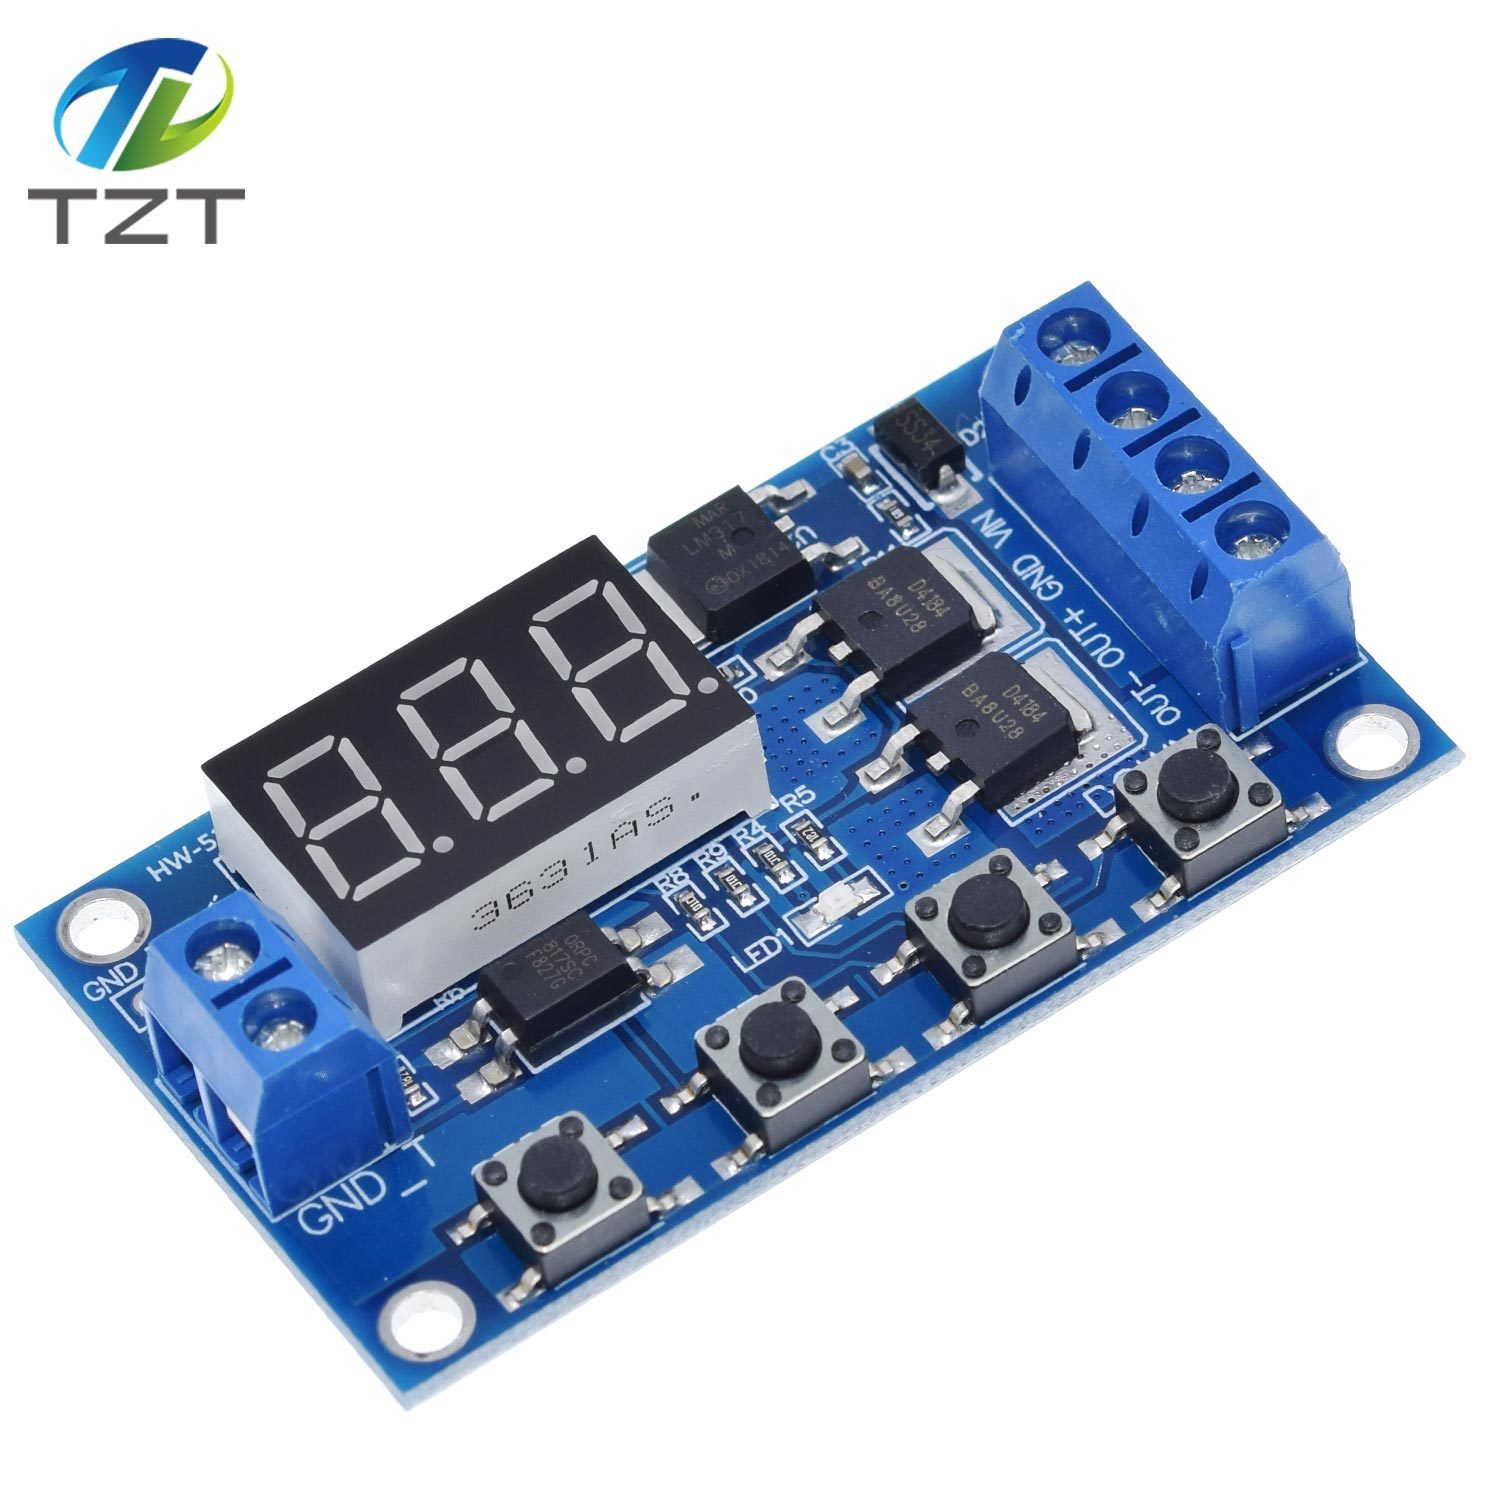 TZT DC 12V 24V Dual MOS LED Digital Time Delay Relay Trigger Cycle Timer Delay Switch Circuit Board Timing Control Module DIY